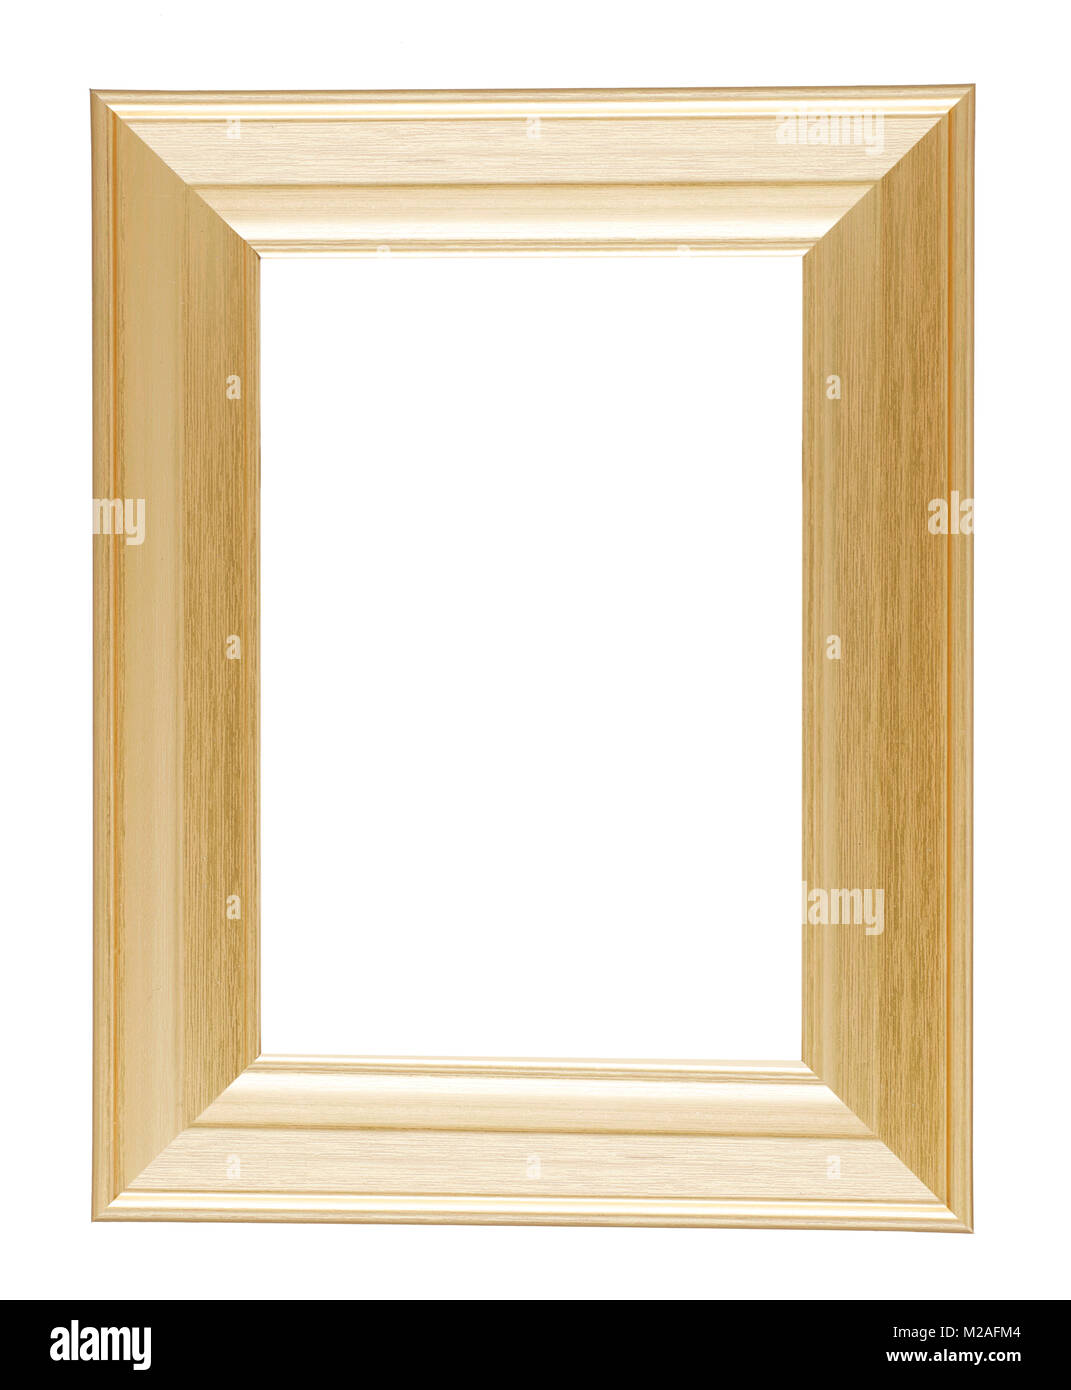 Gold picture frame Stock Photo